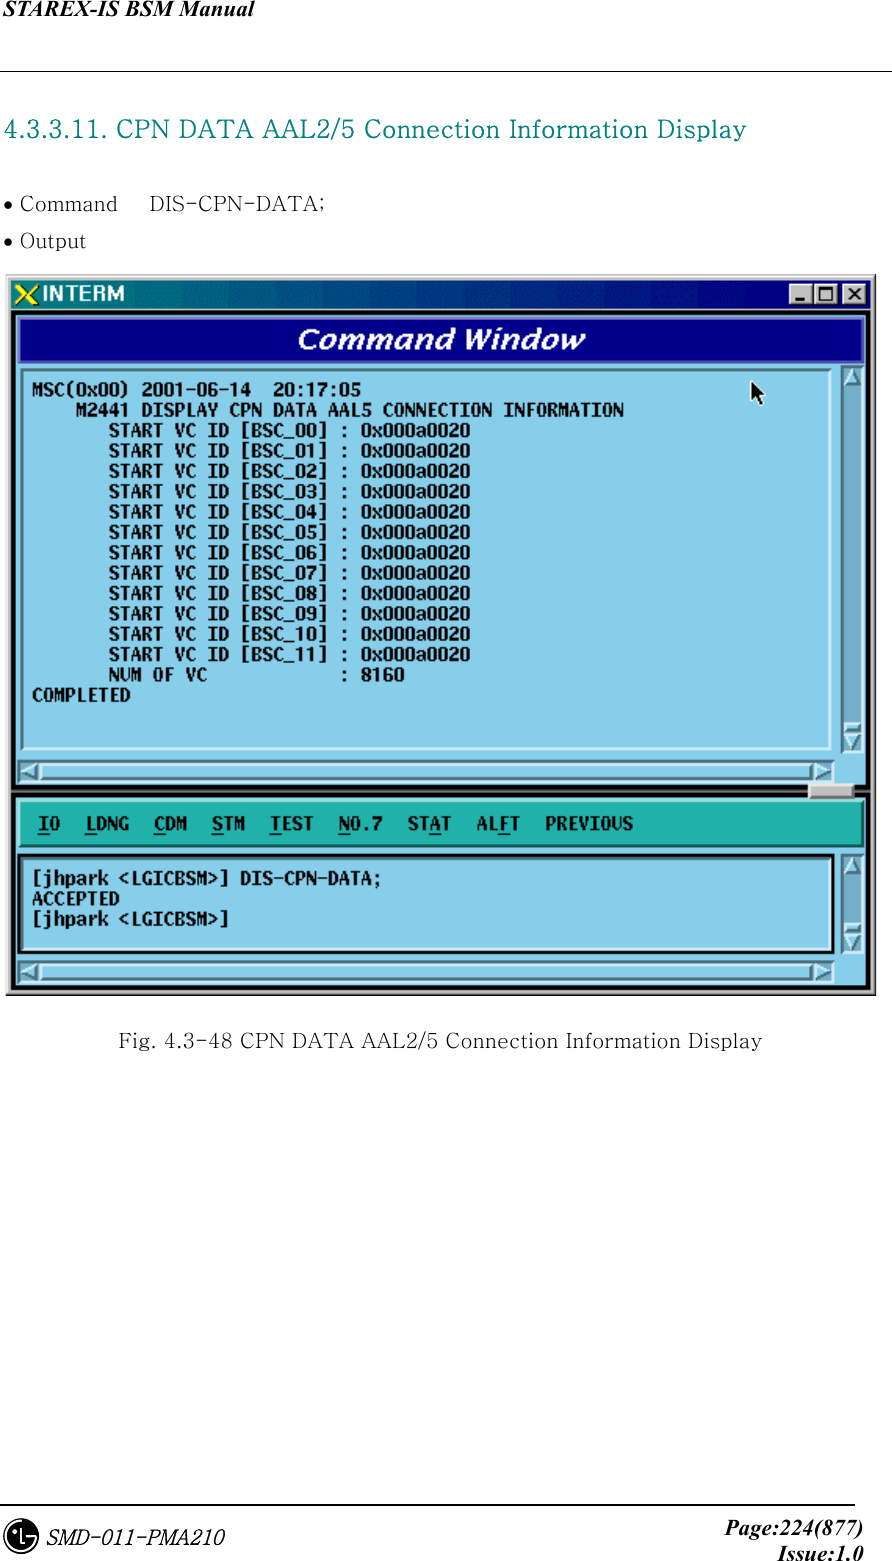 STAREX-IS BSM Manual     Page:224(877)Issue:1.0SMD-011-PMA210  4.3.3.11. CPN DATA AAL2/5 Connection Information Display  • Command   DIS-CPN-DATA; • Output  Fig. 4.3-48 CPN DATA AAL2/5 Connection Information Display 